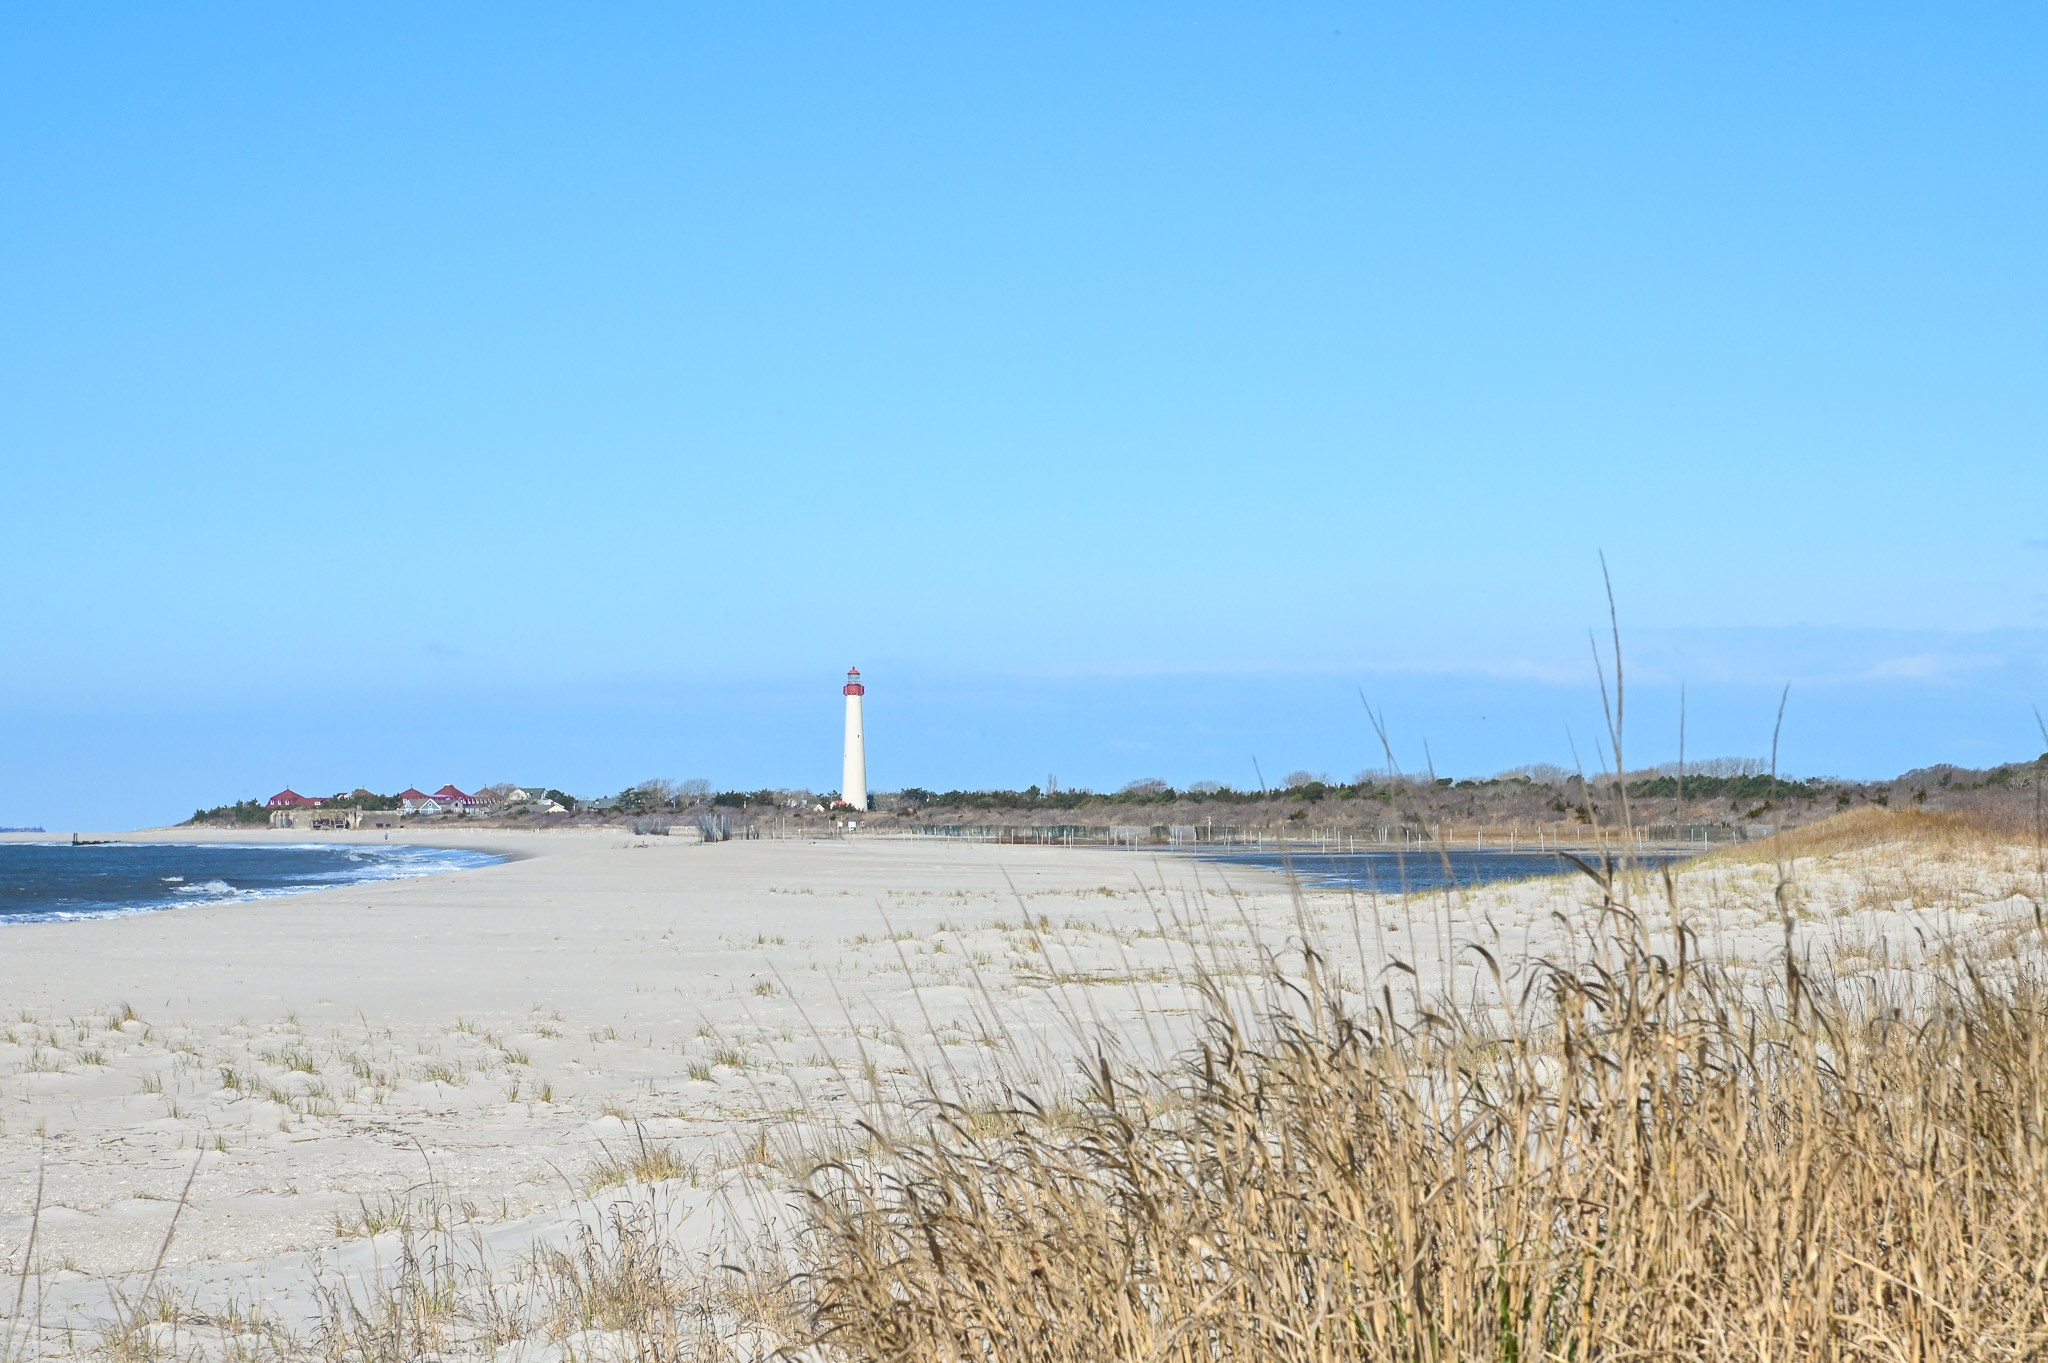 A View From The Cove of the beach, Cape May Light House, the WWII Bunker, and the Science Center.